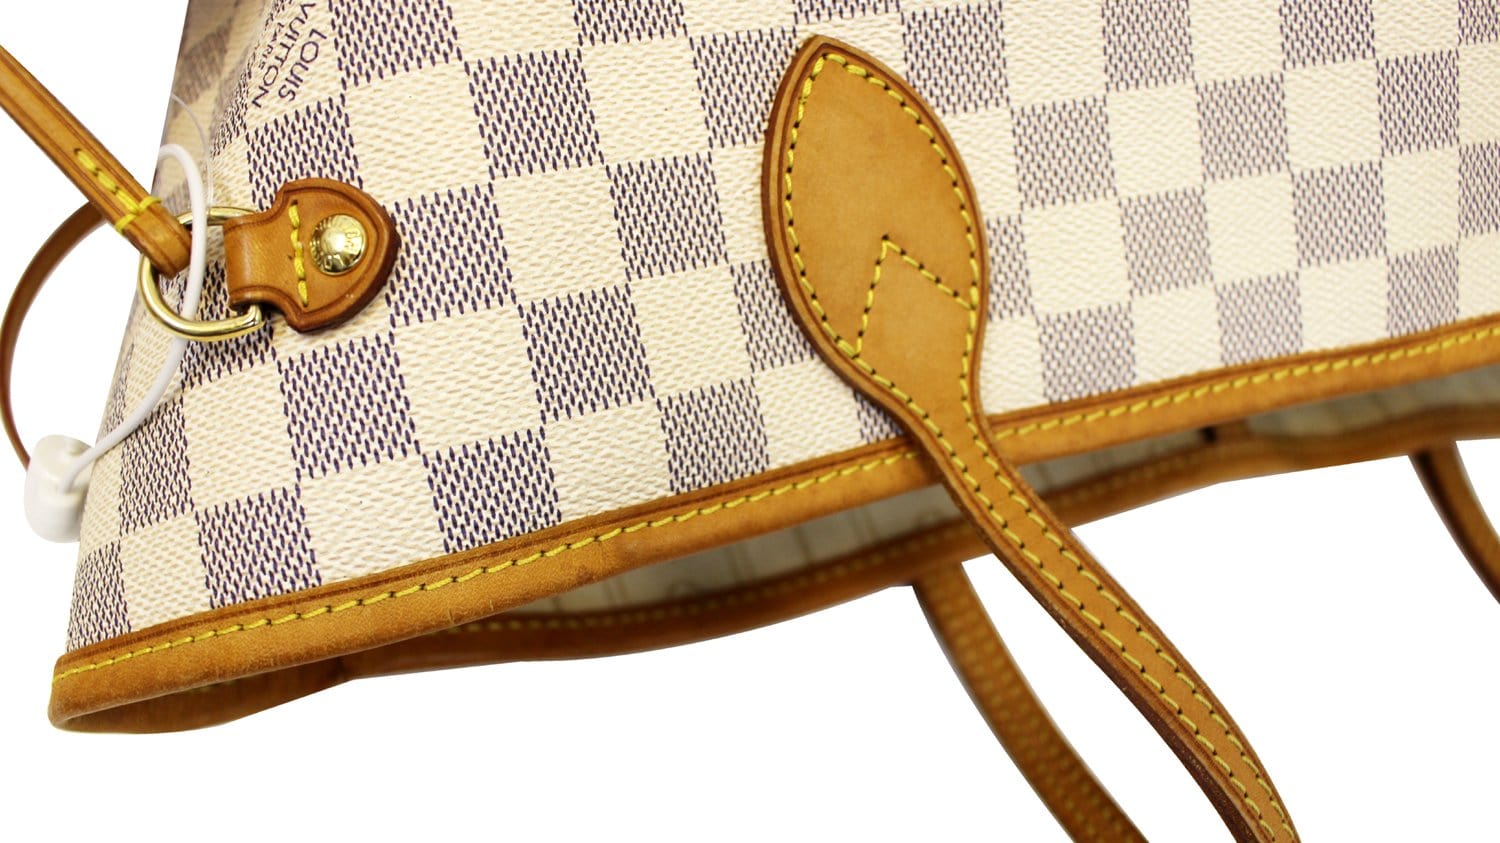 Louis Vuitton Damier Azur Neverfull MM Tote Bag Leather ref.306162